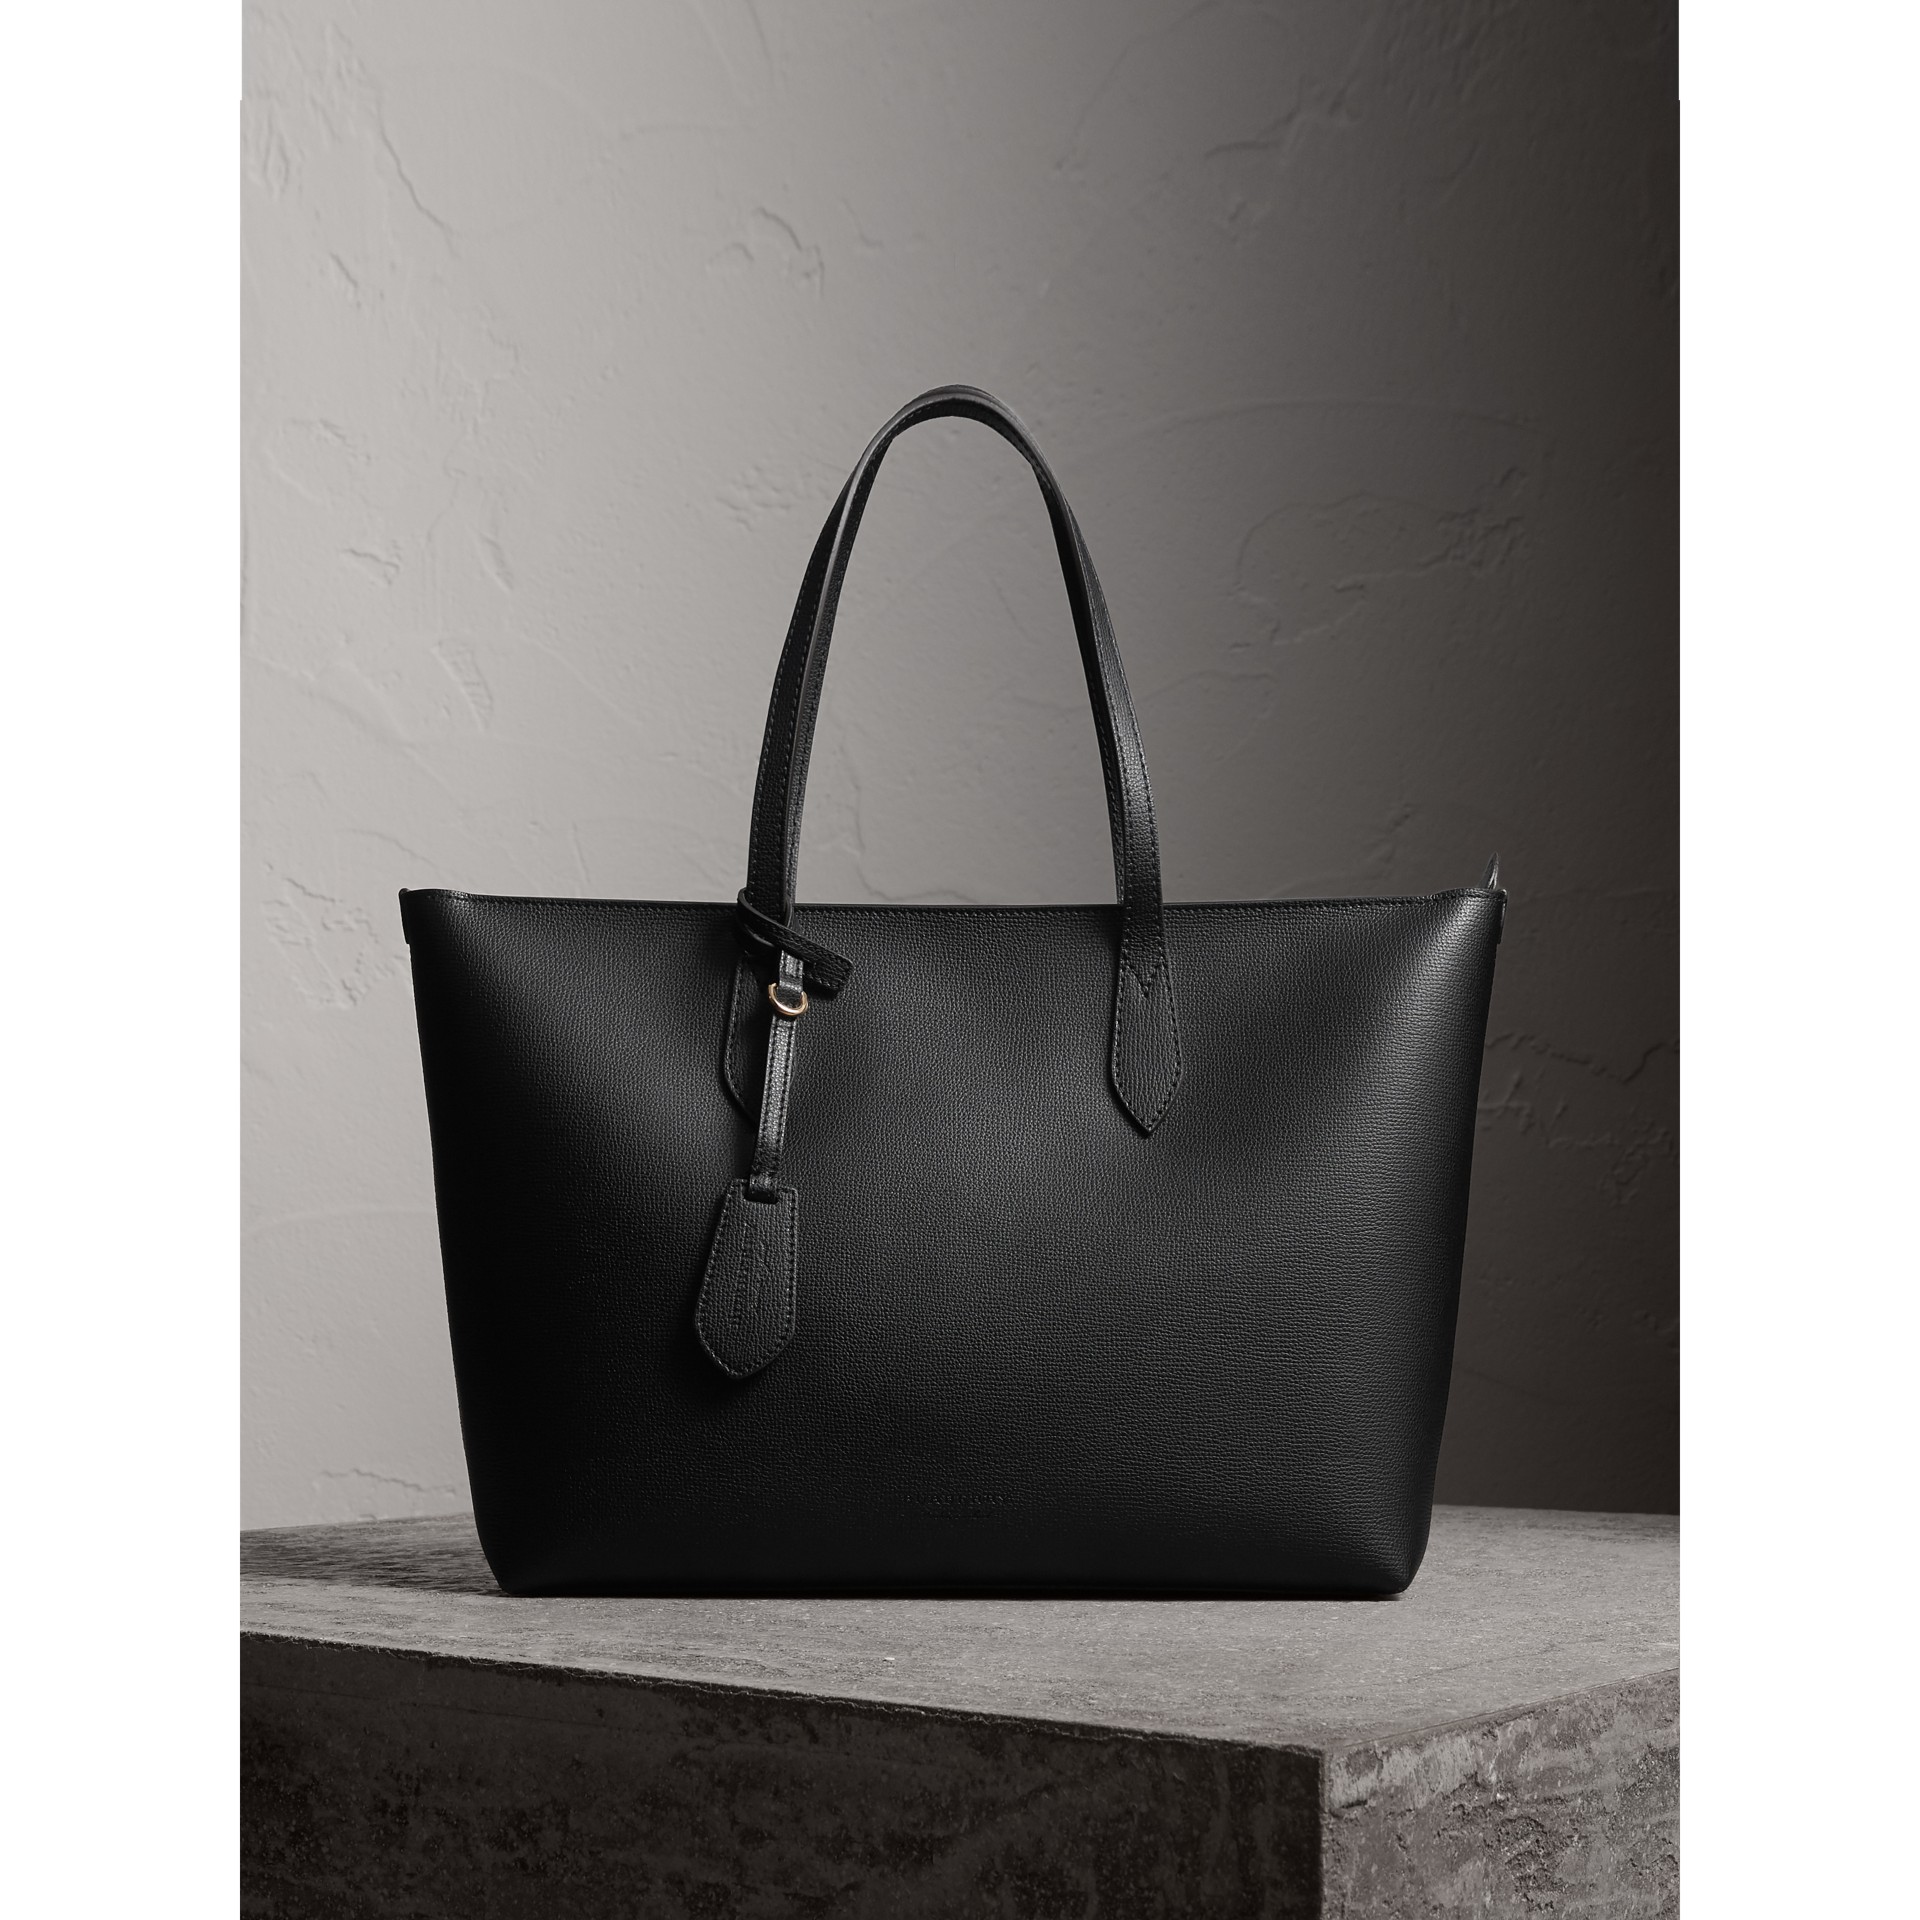 Burberry Medium Coated Leather Tote In Black | ModeSens